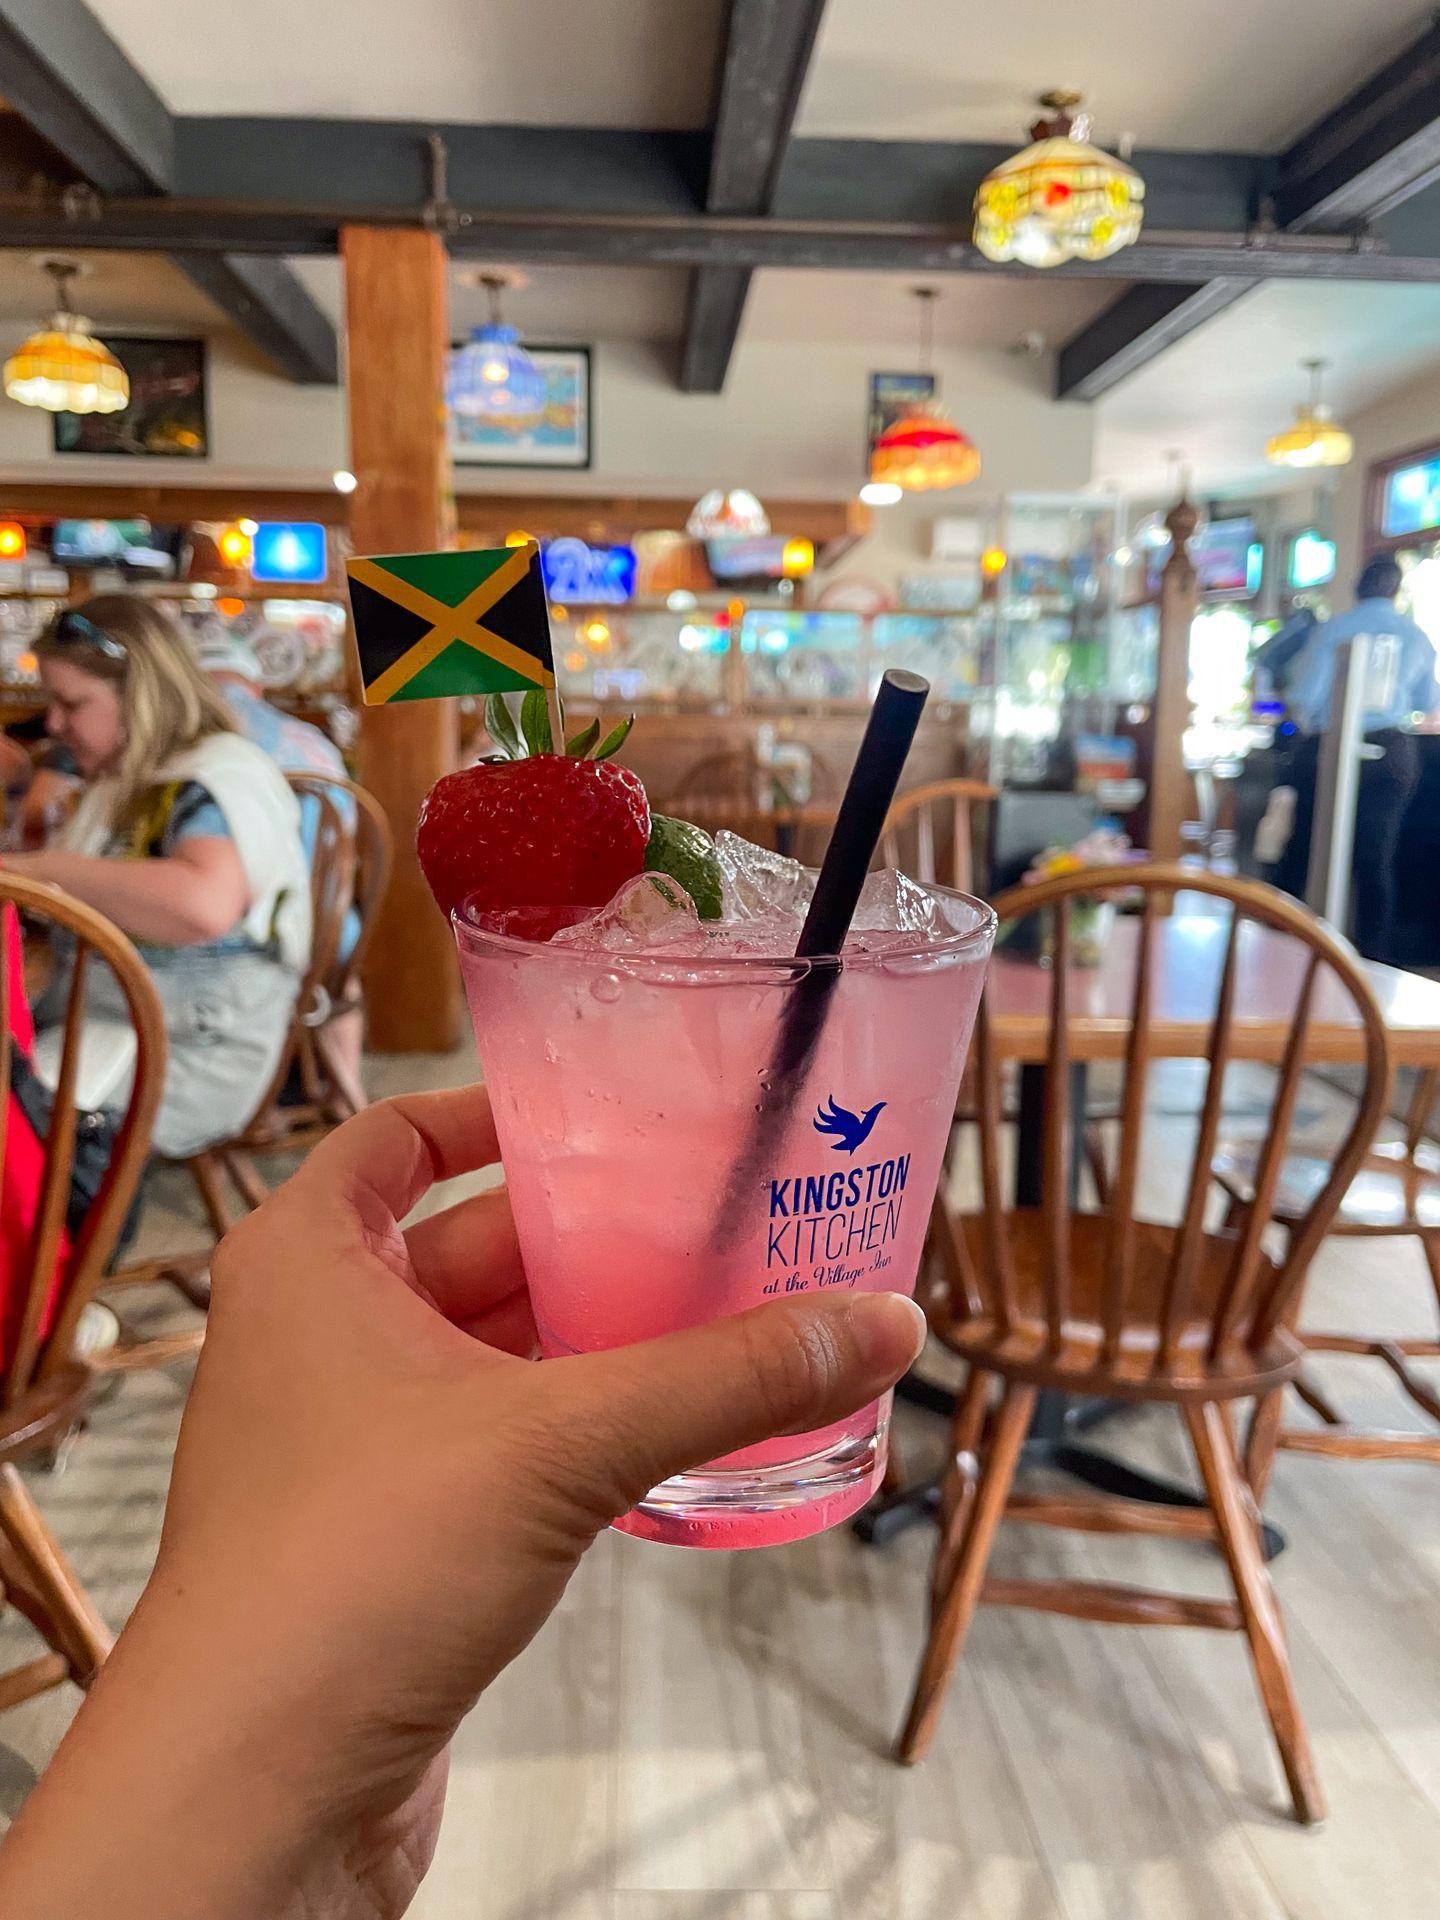 Holding up a pink cocktail with a Jamaican flag sticking out of it